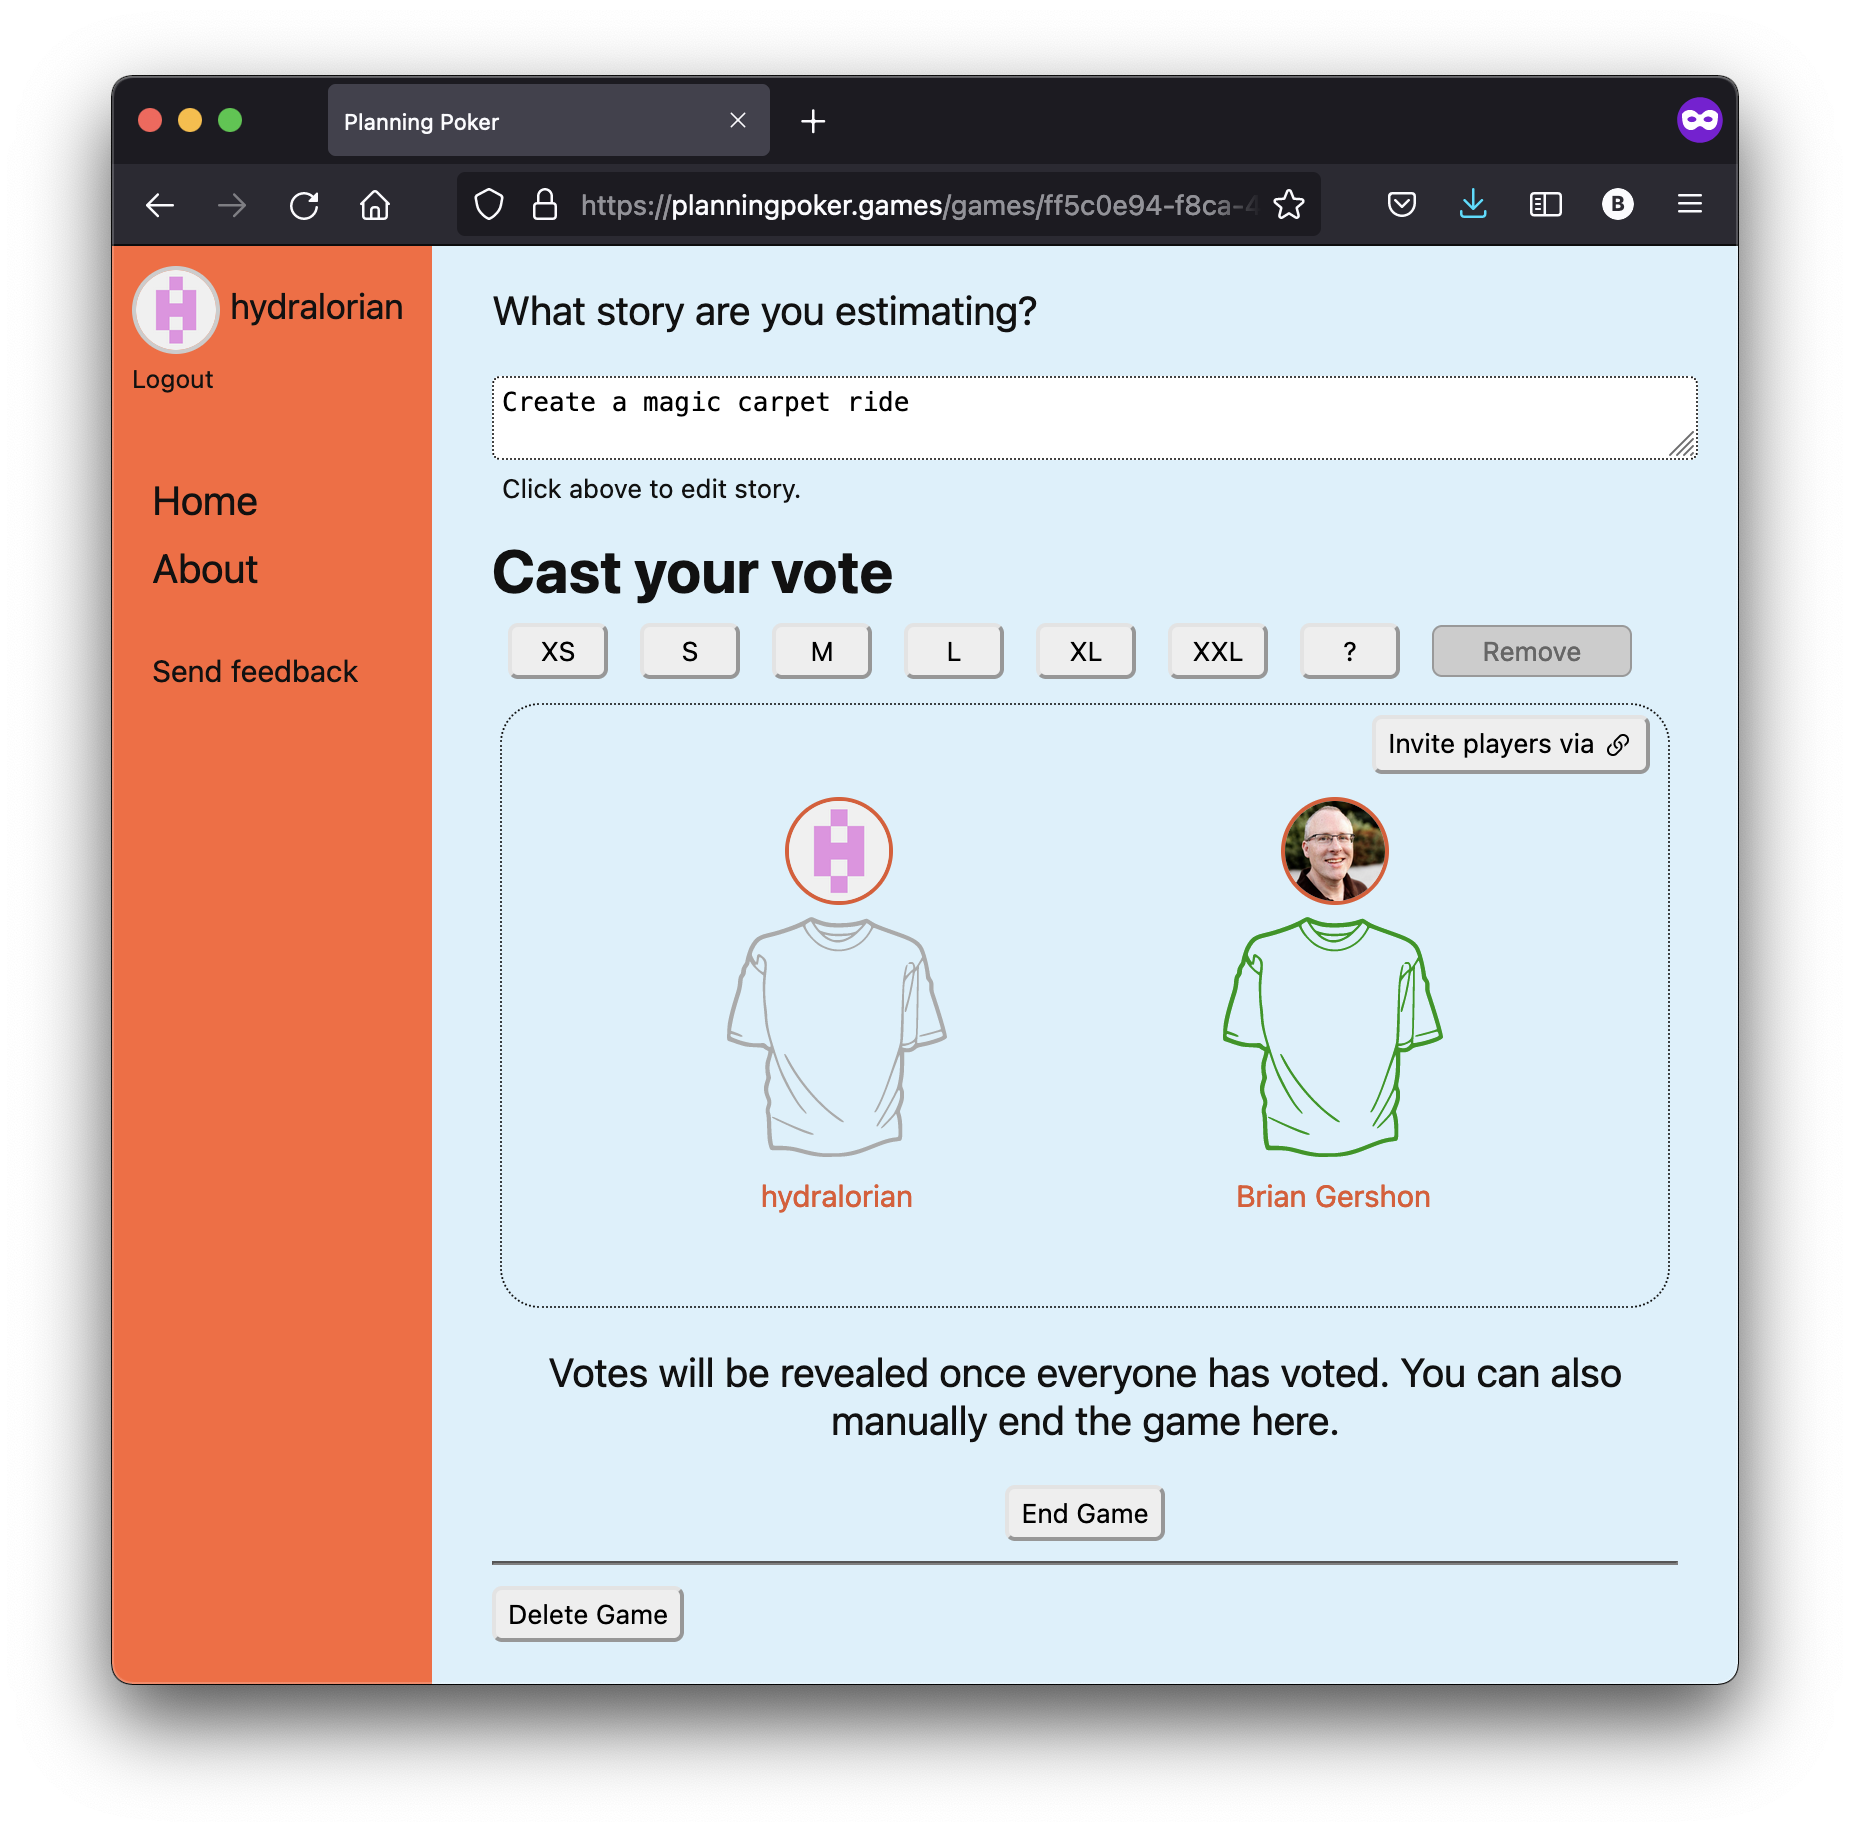 Screenshot of a Planning Poker game in progress where one player had voted their estimated t-shirt size